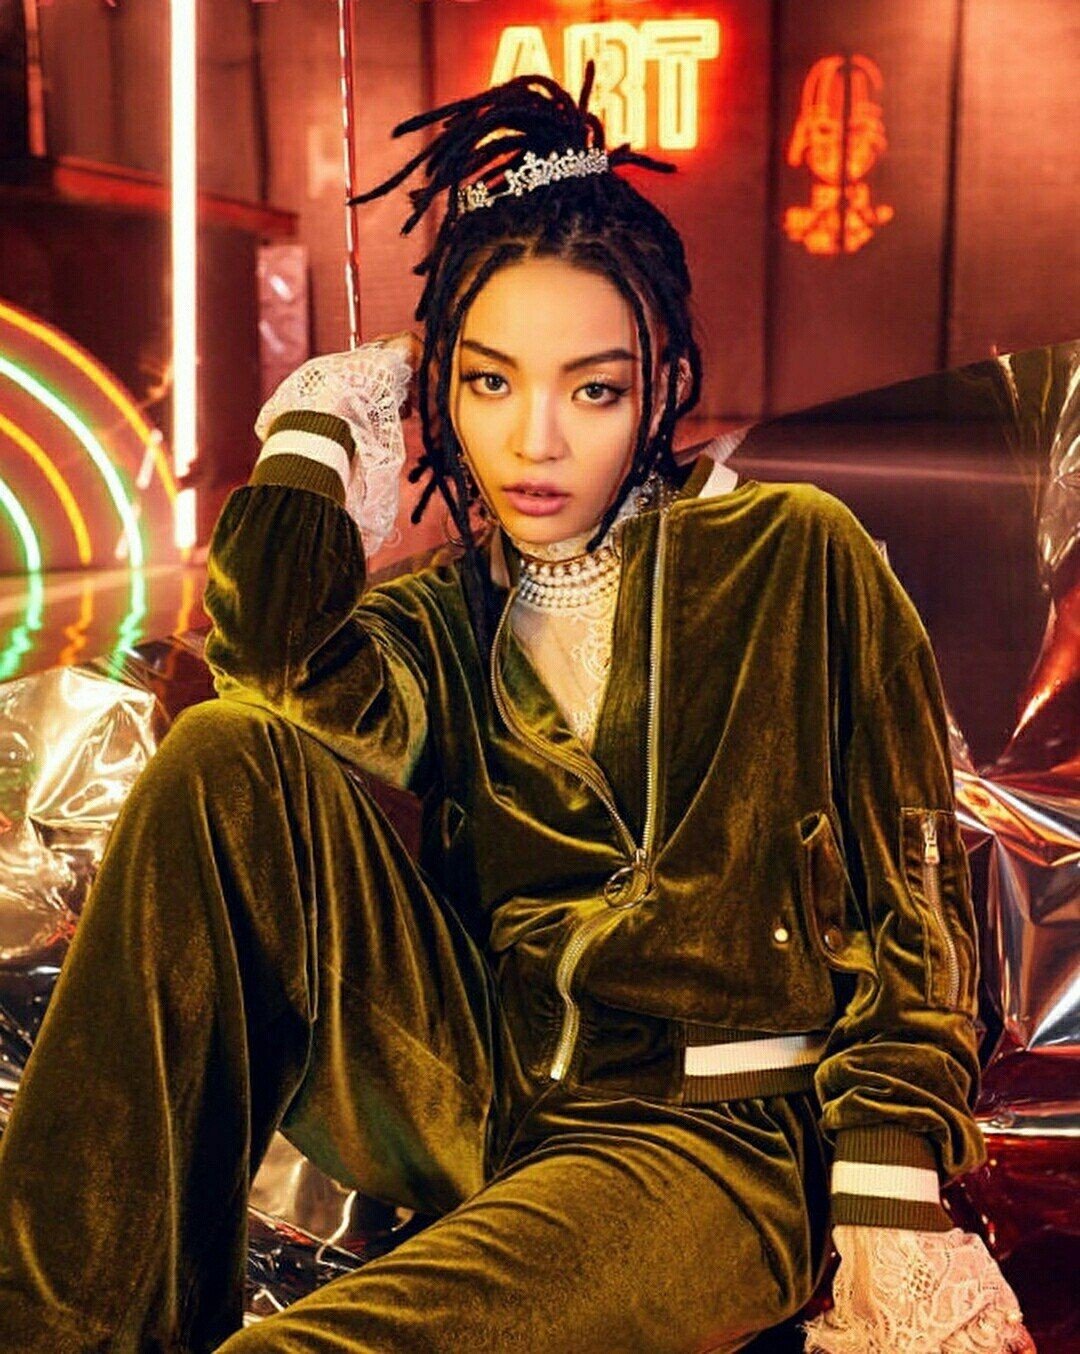 Chinese rapper Vava’s song My New Swag featured in Crazy Rich Asians.